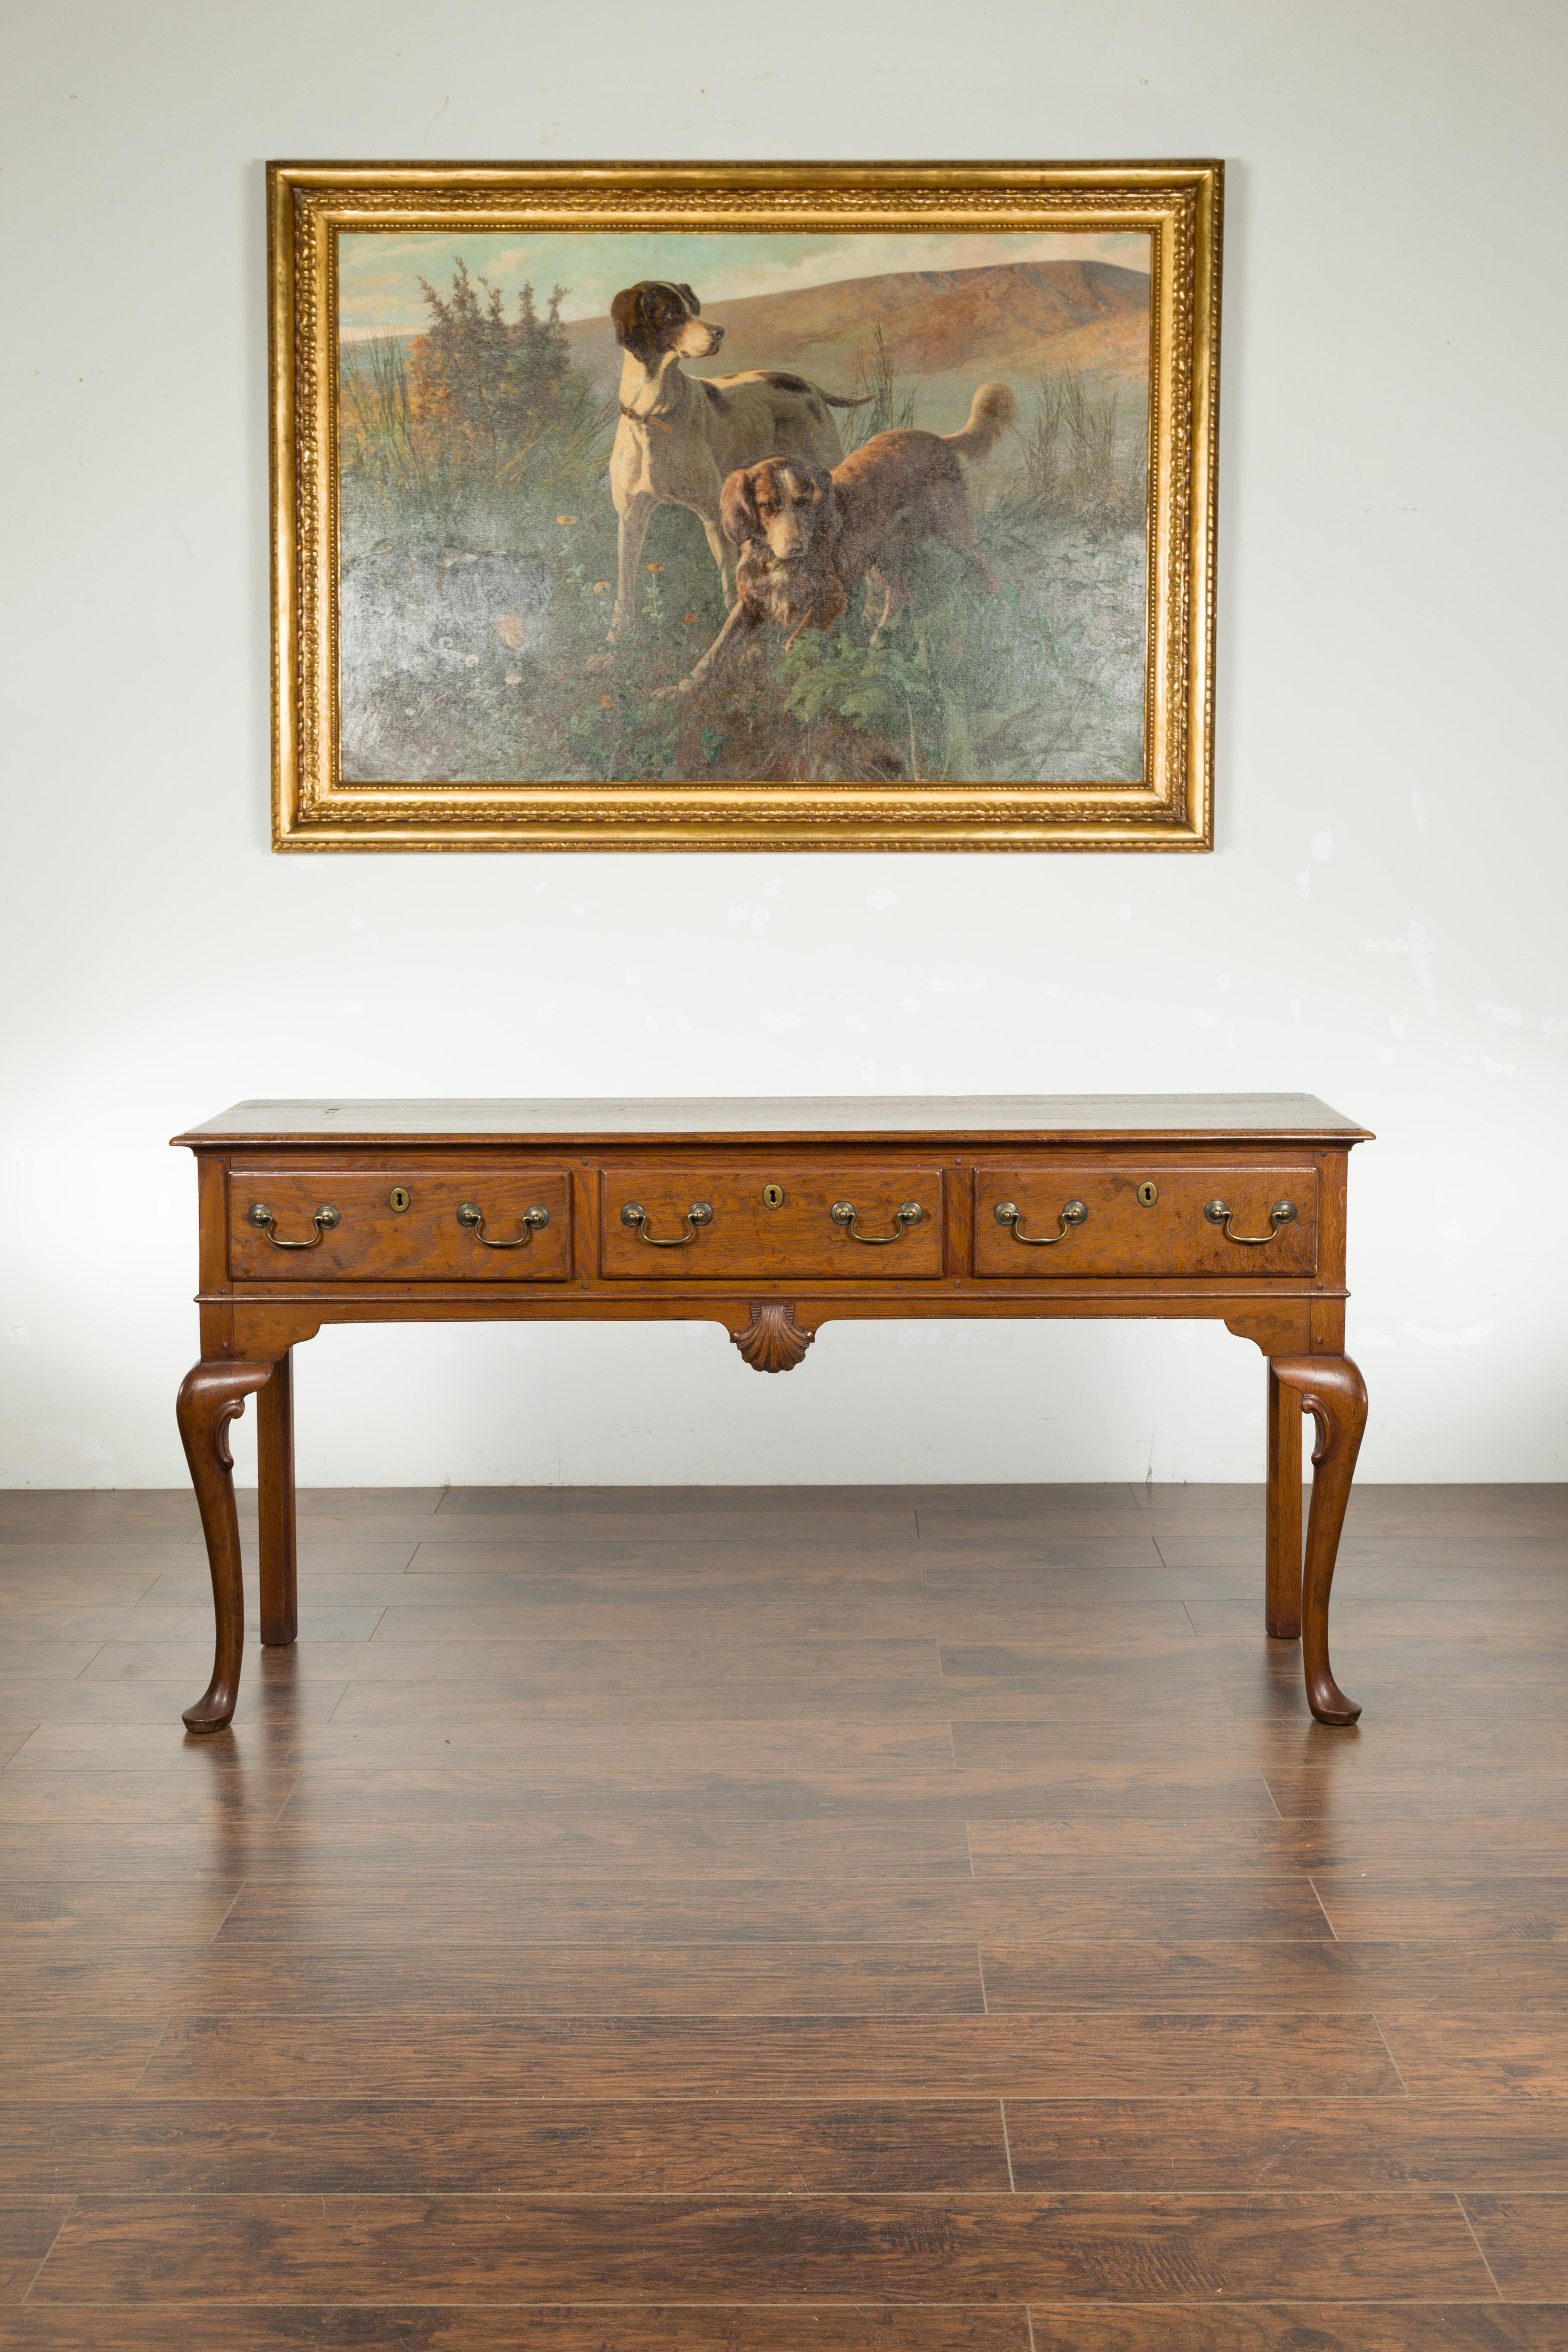 20th Century English 1900s Oak Dresser Base with Drawers, Cabrioles Legs and Carved Shell